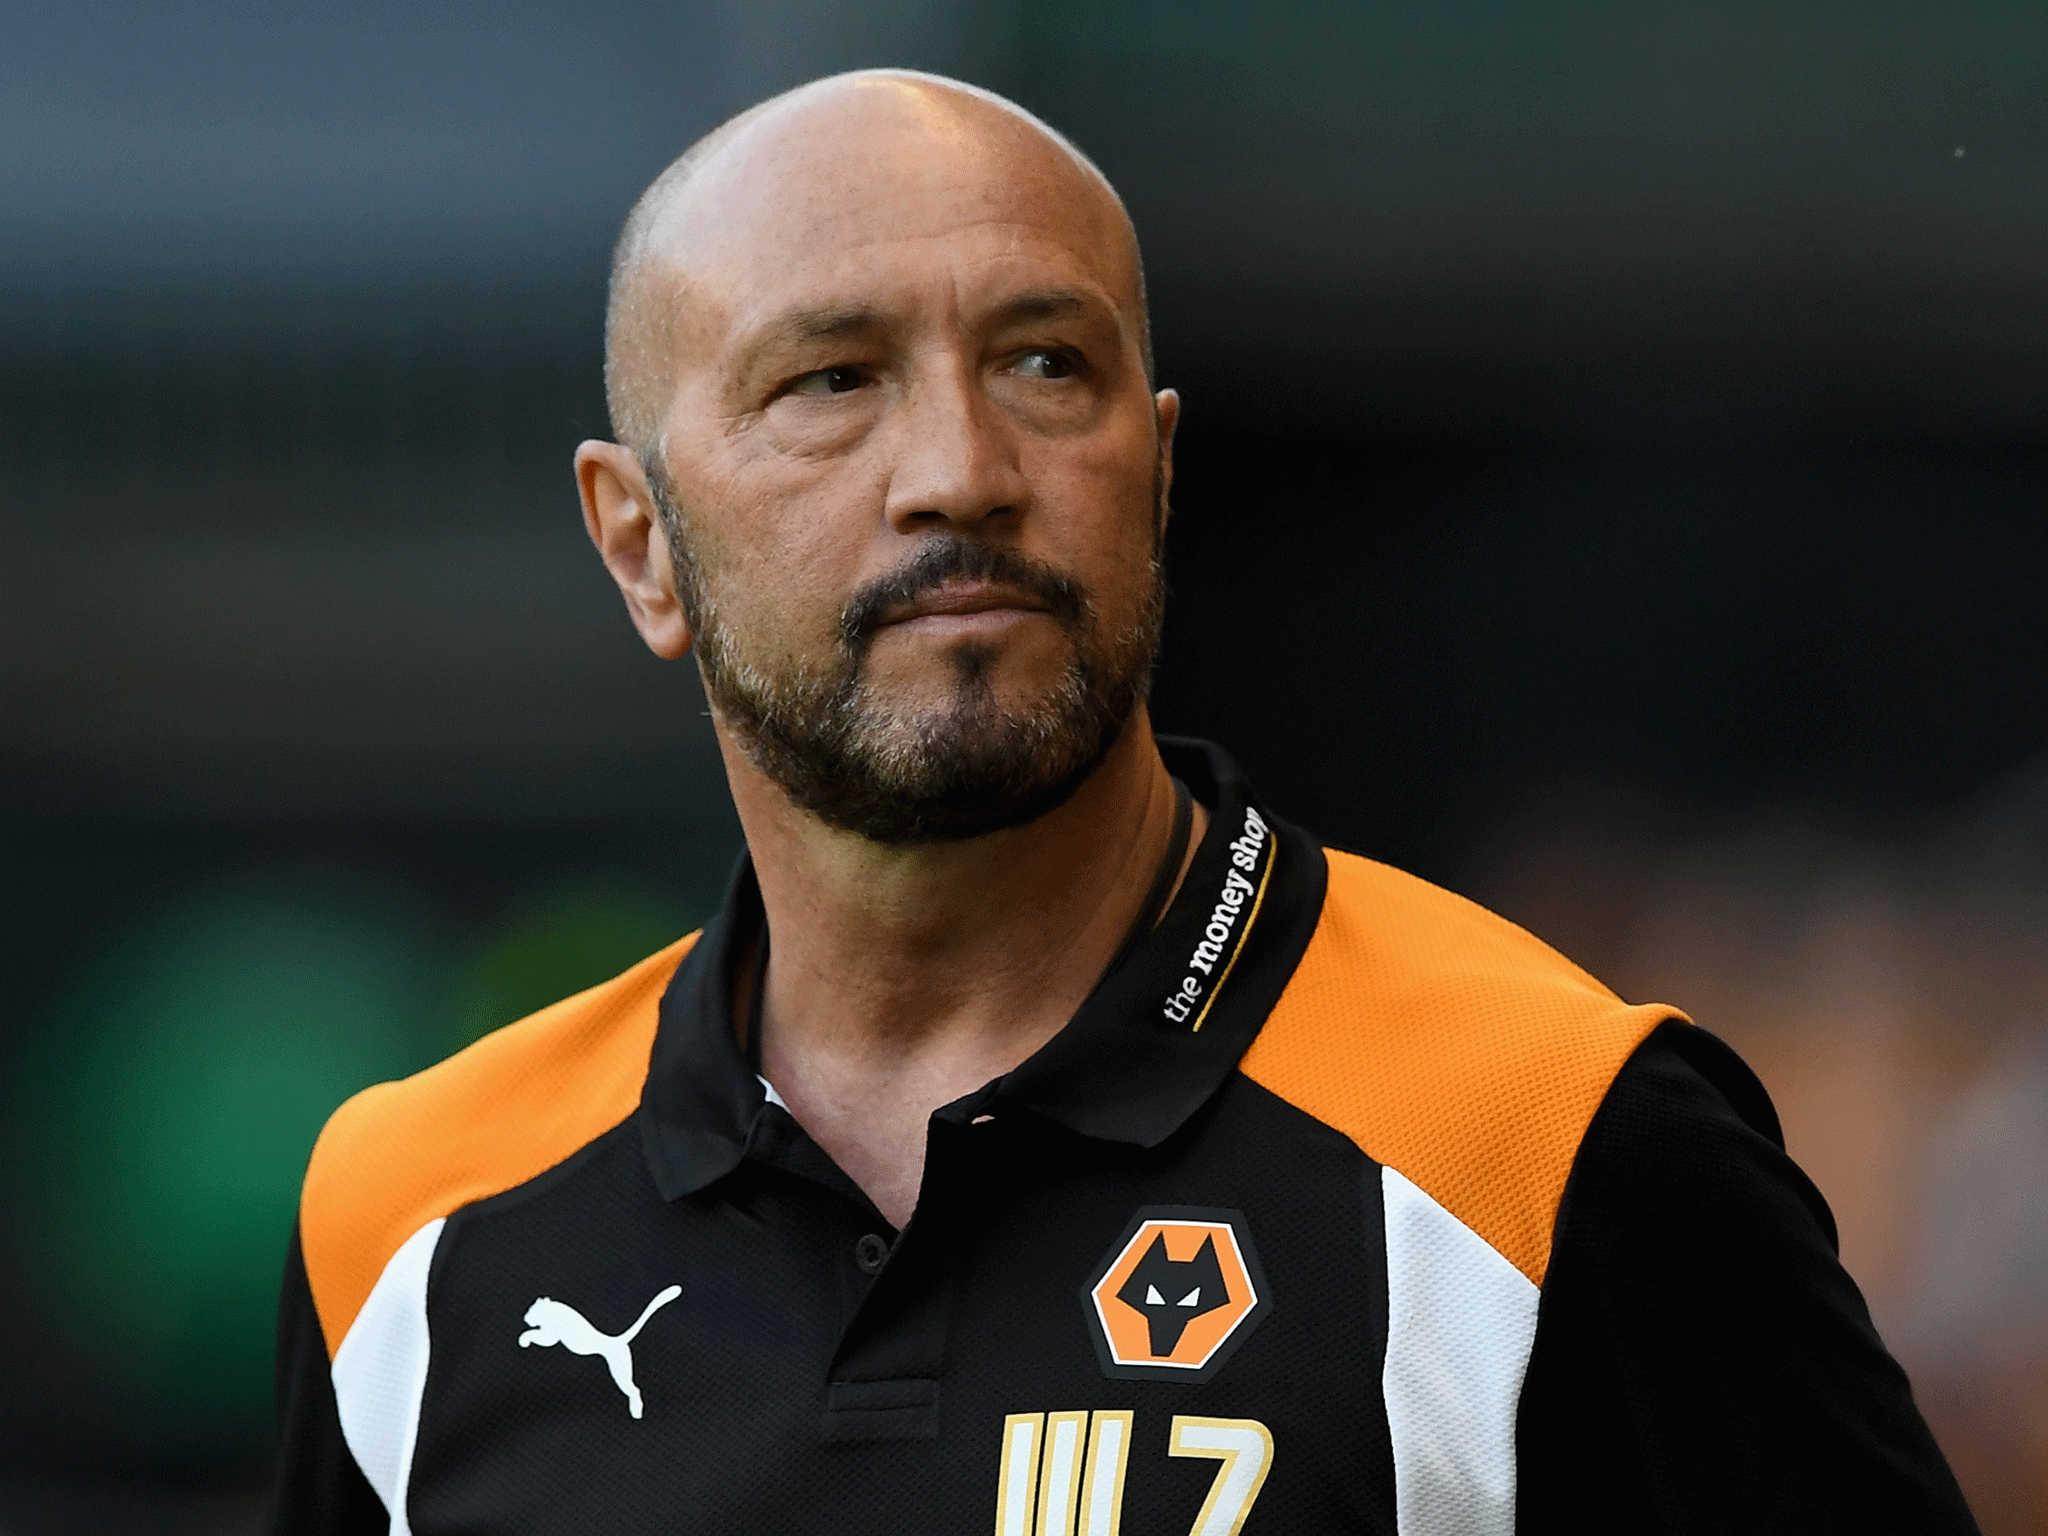 Zenga has made a bright start to life at Wolves